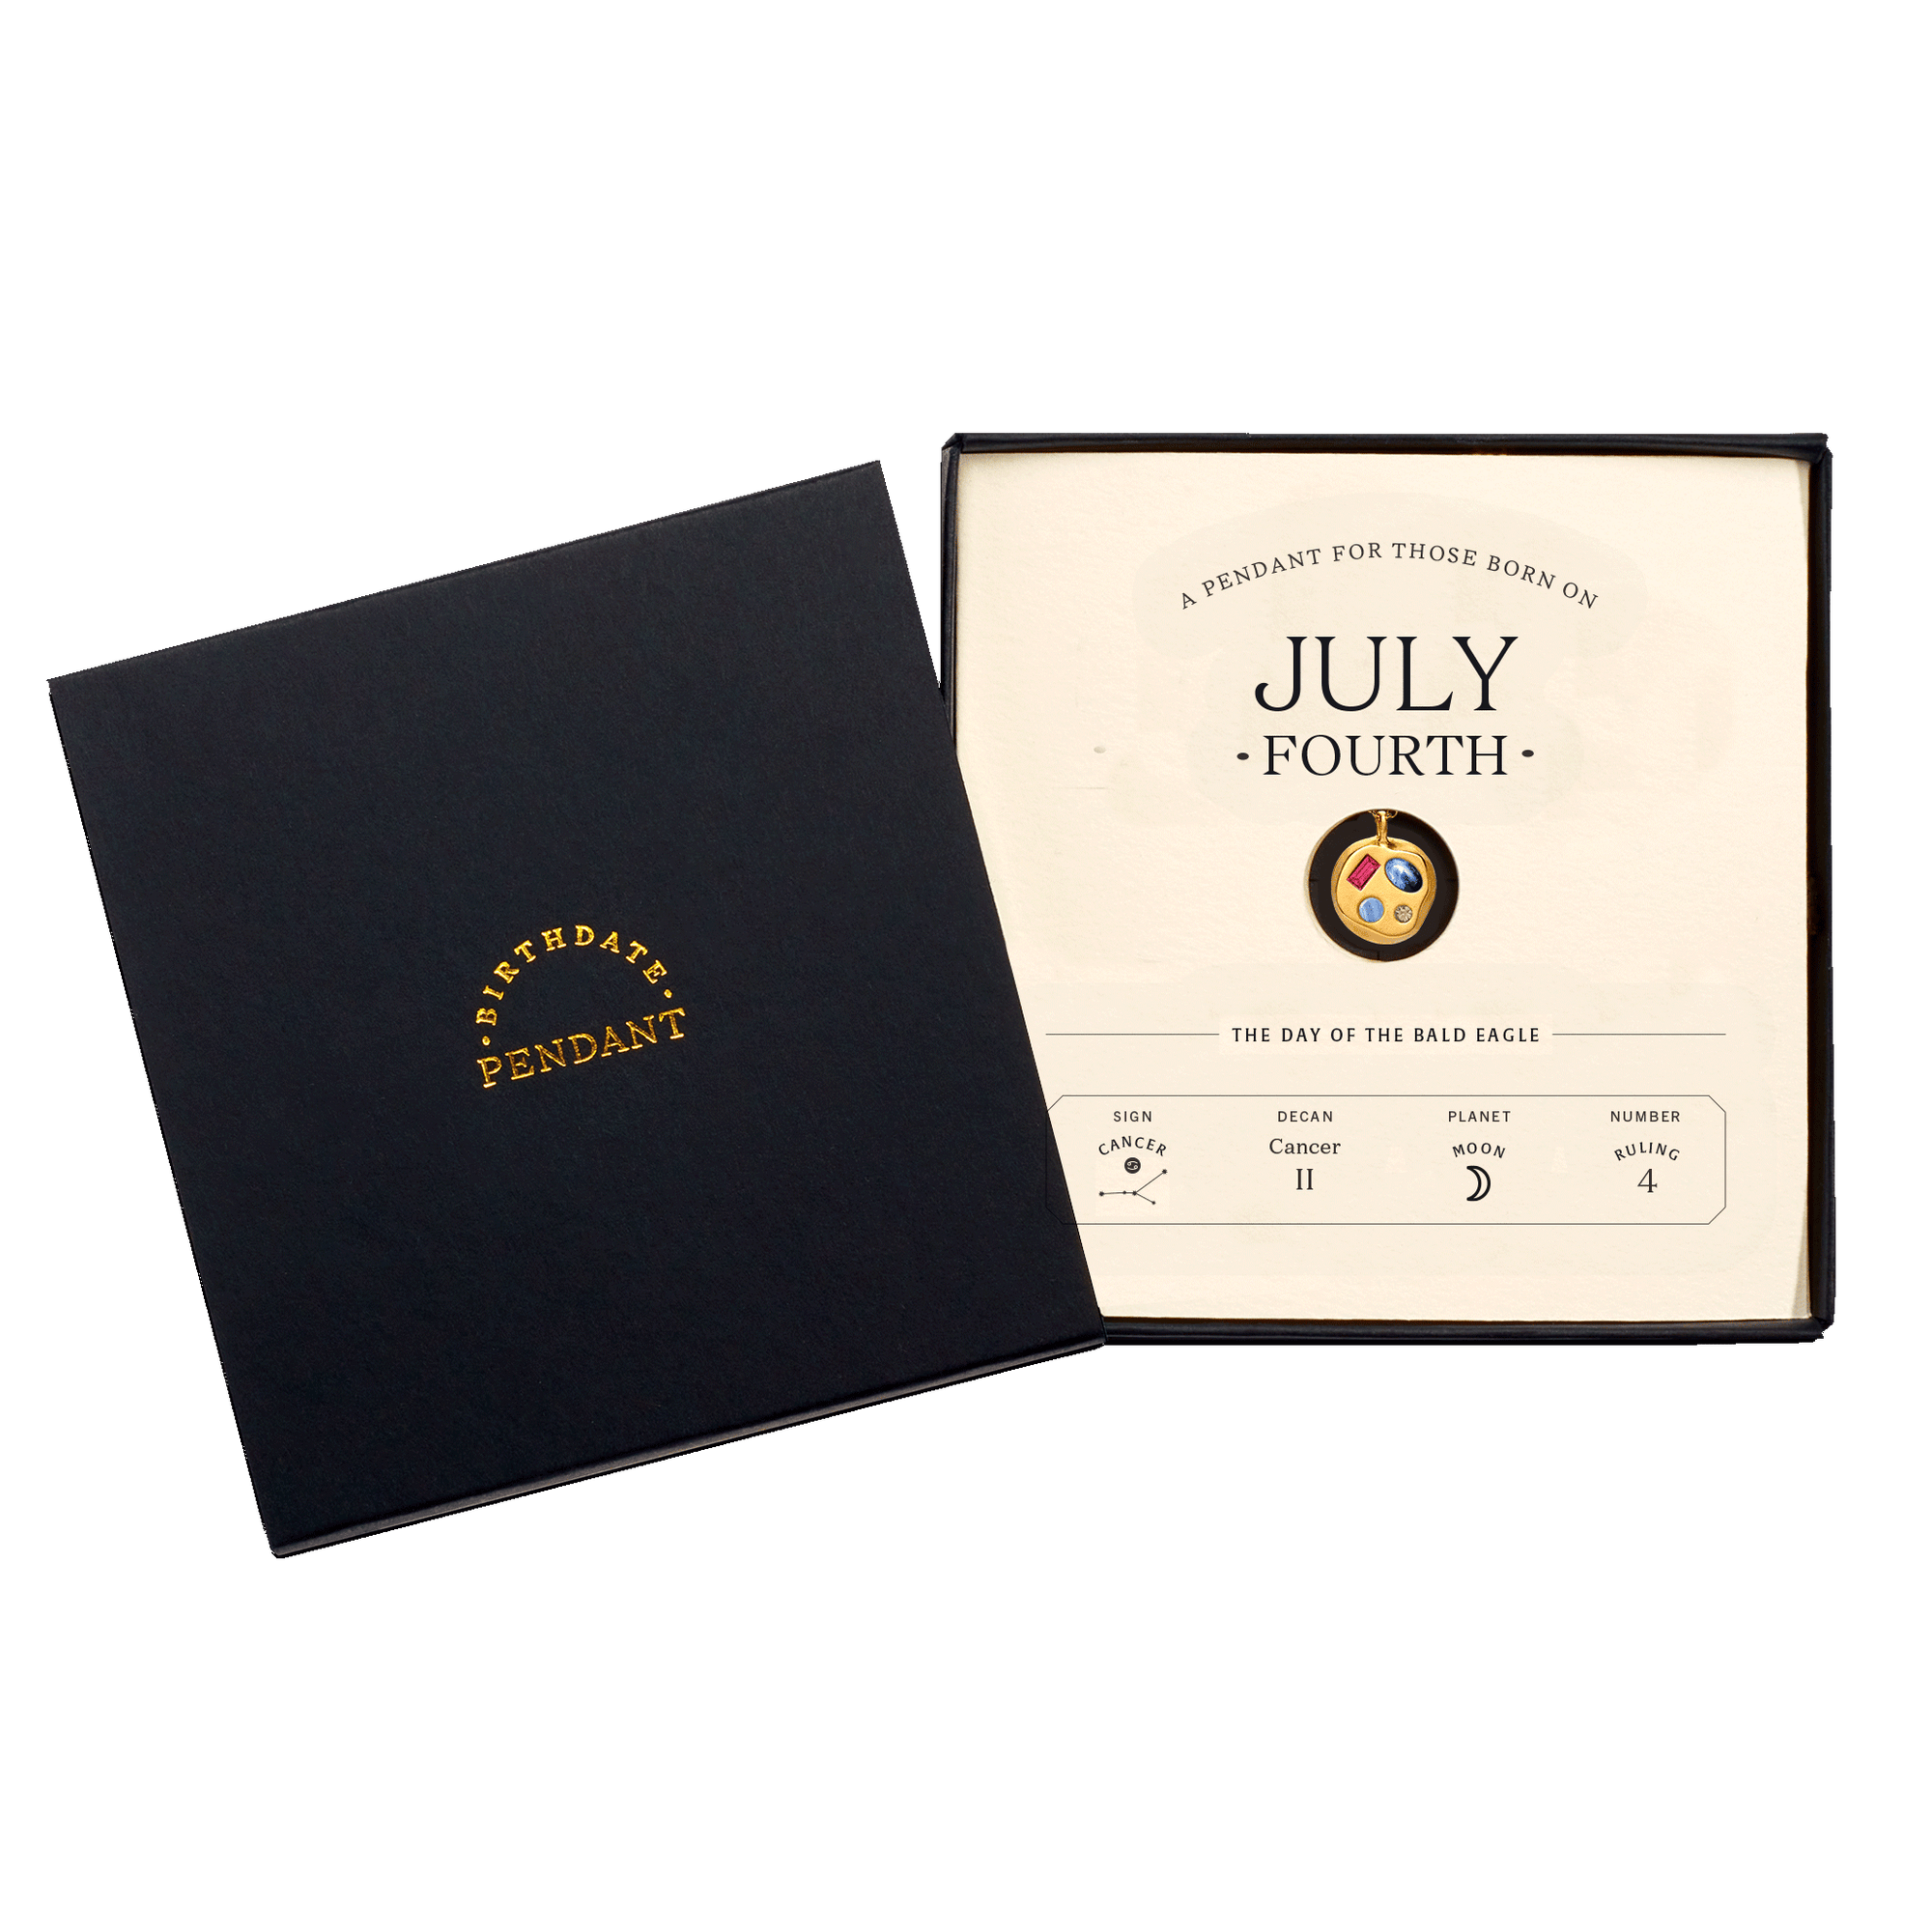 The July Fourth Pendant inside its box